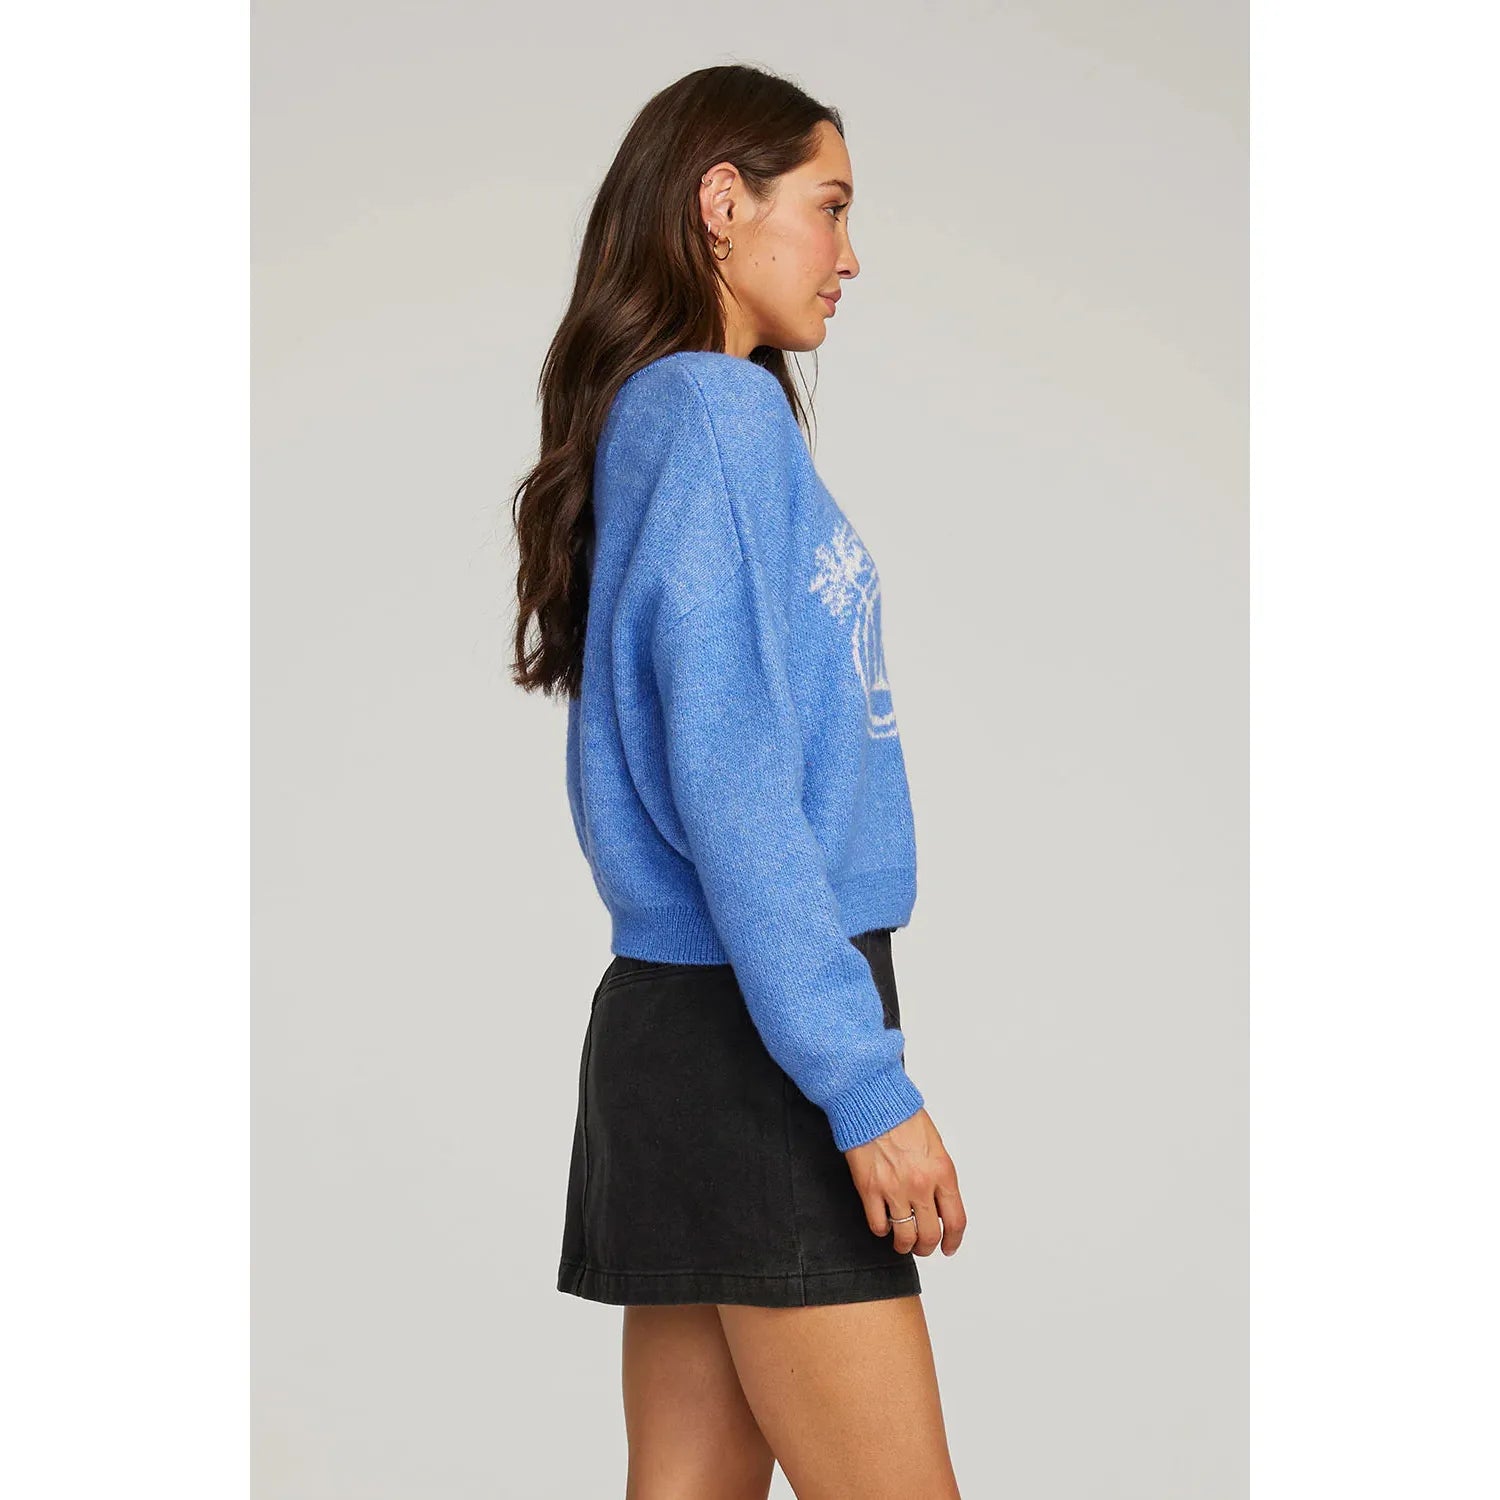 Saltwater Luxe - Ganna Sweater in Pacific